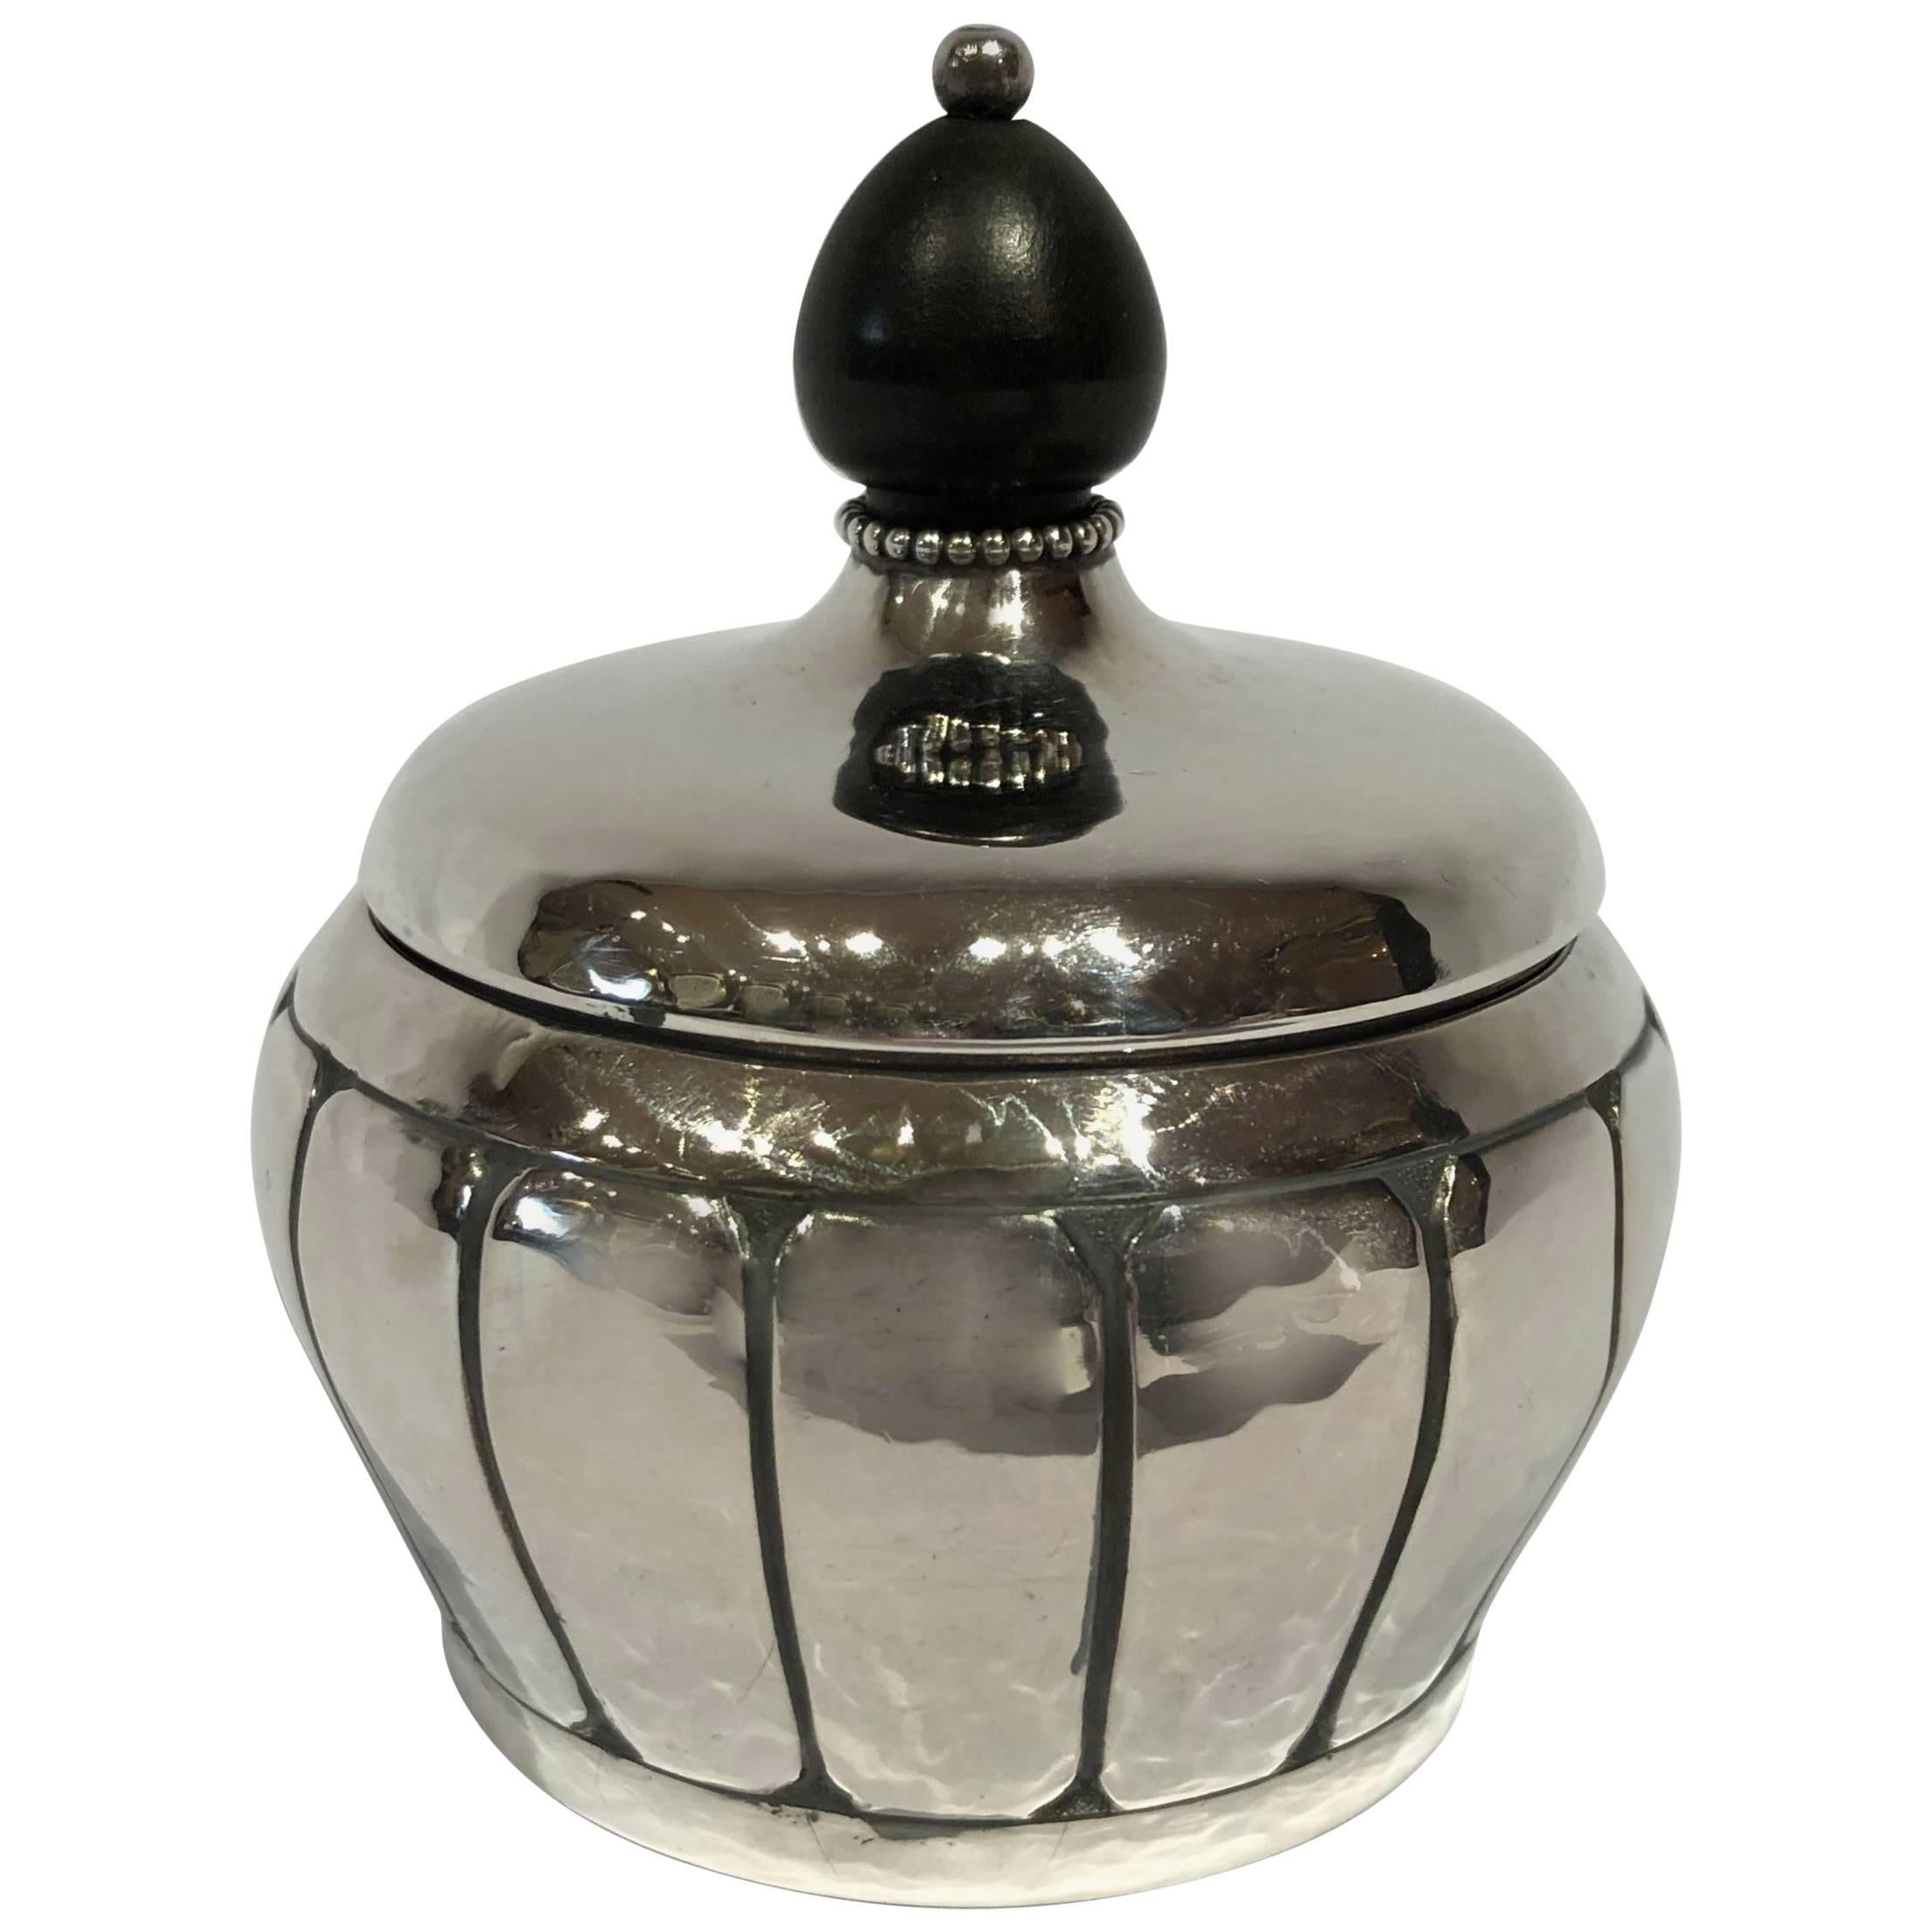 Small Sugar Bowl in Hallmarked Silver with Pearl Edge and Ebony Handle